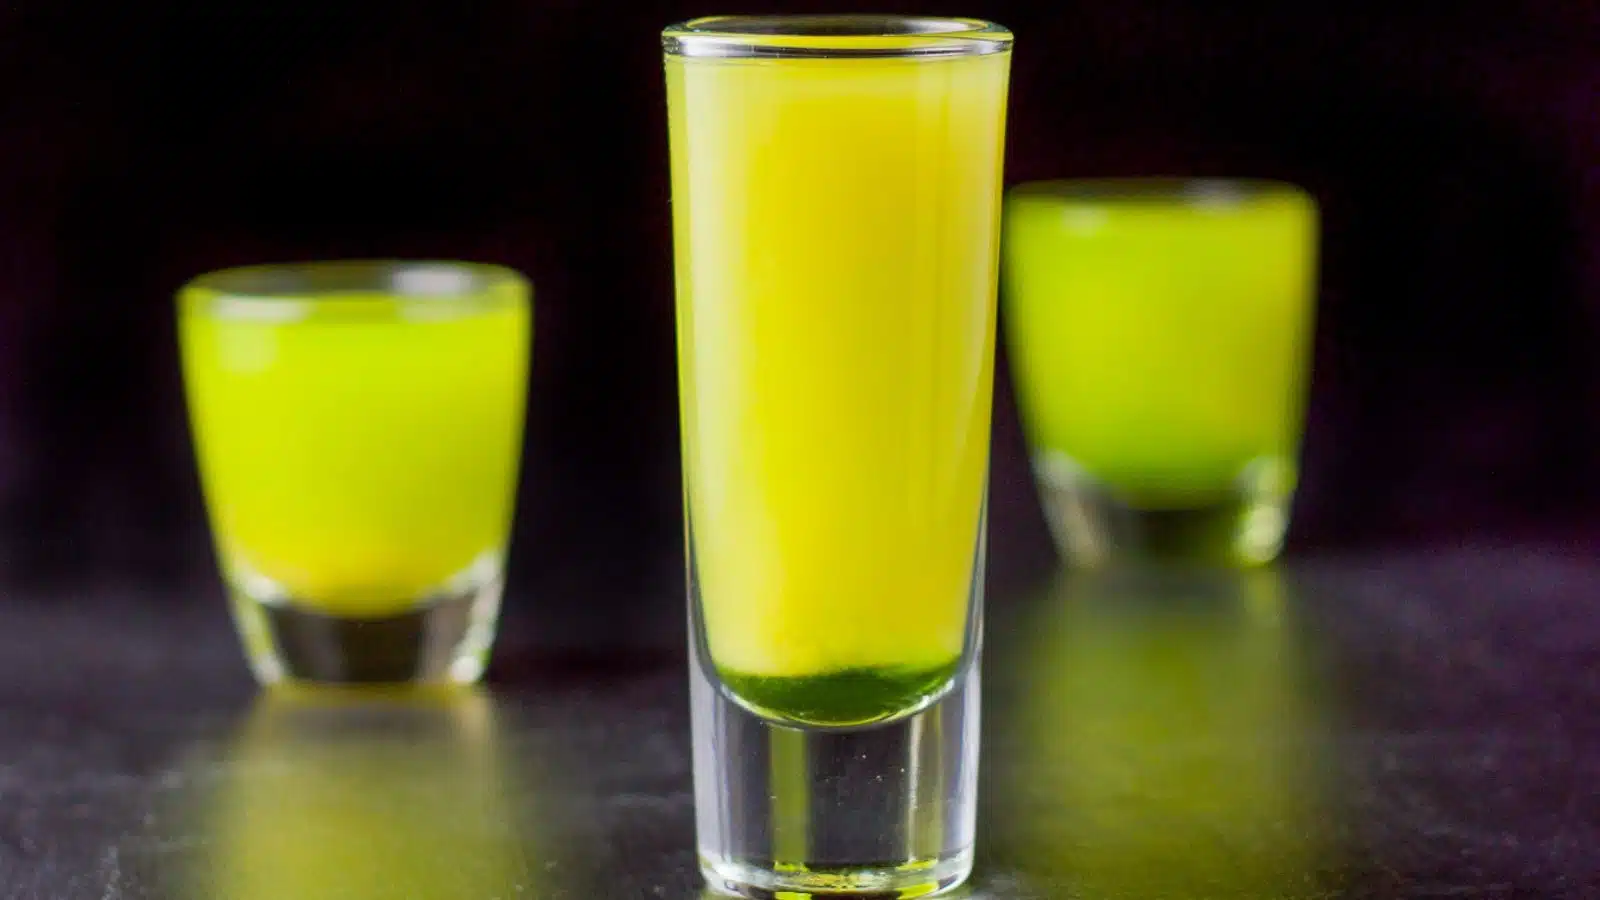 three shot glasses filled with the green and yellow shot